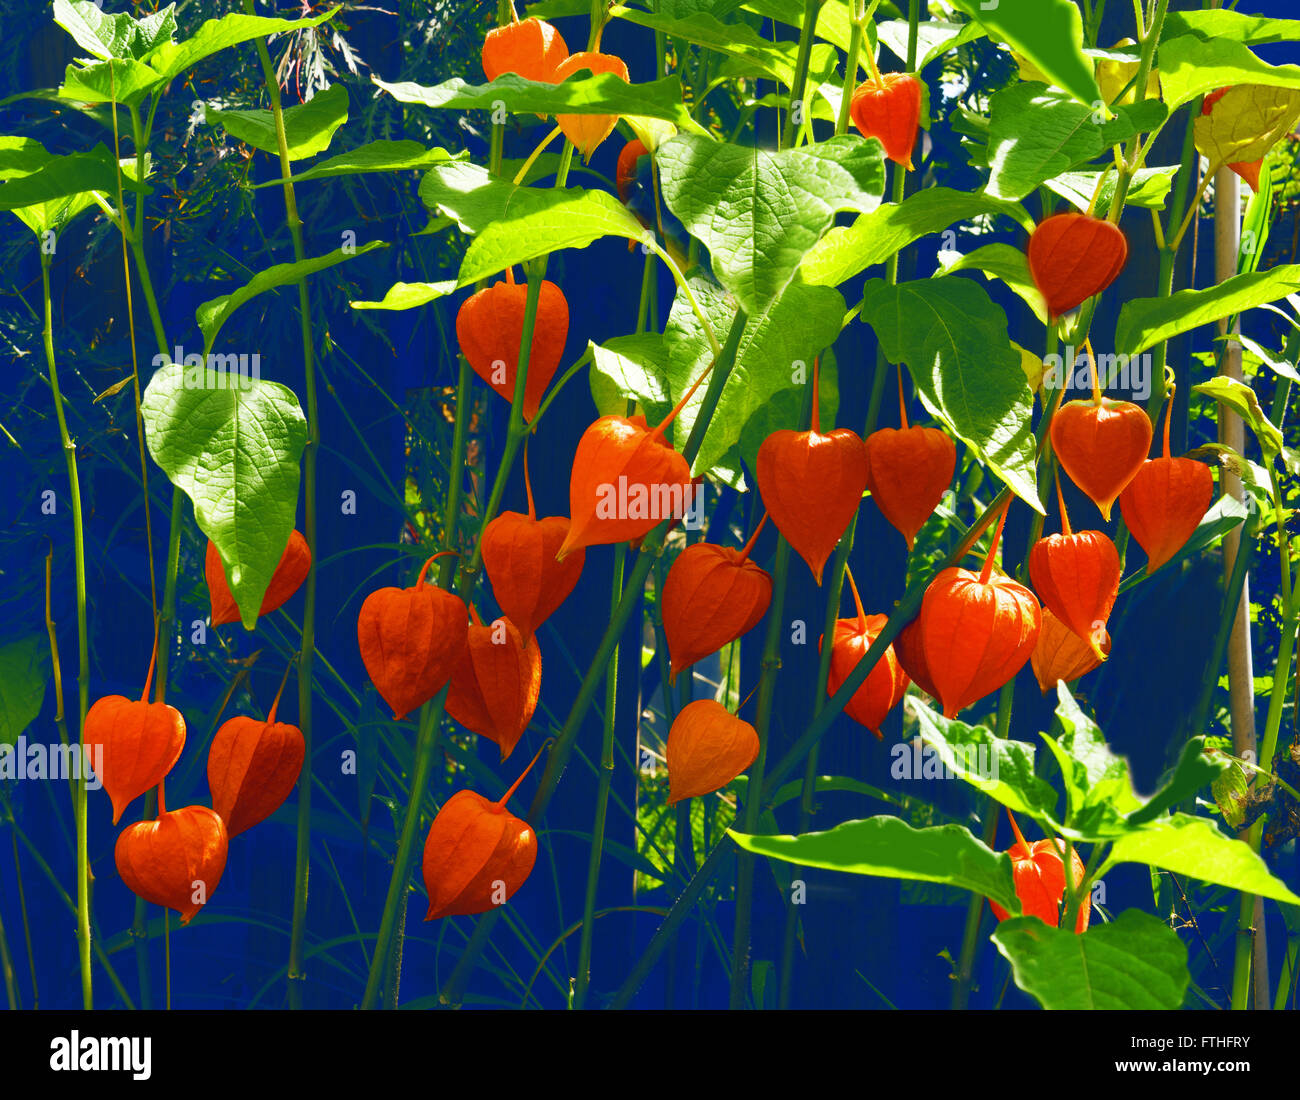 Chinese lantern with numerous orange blossoms in front of a blue garden fence Stock Photo